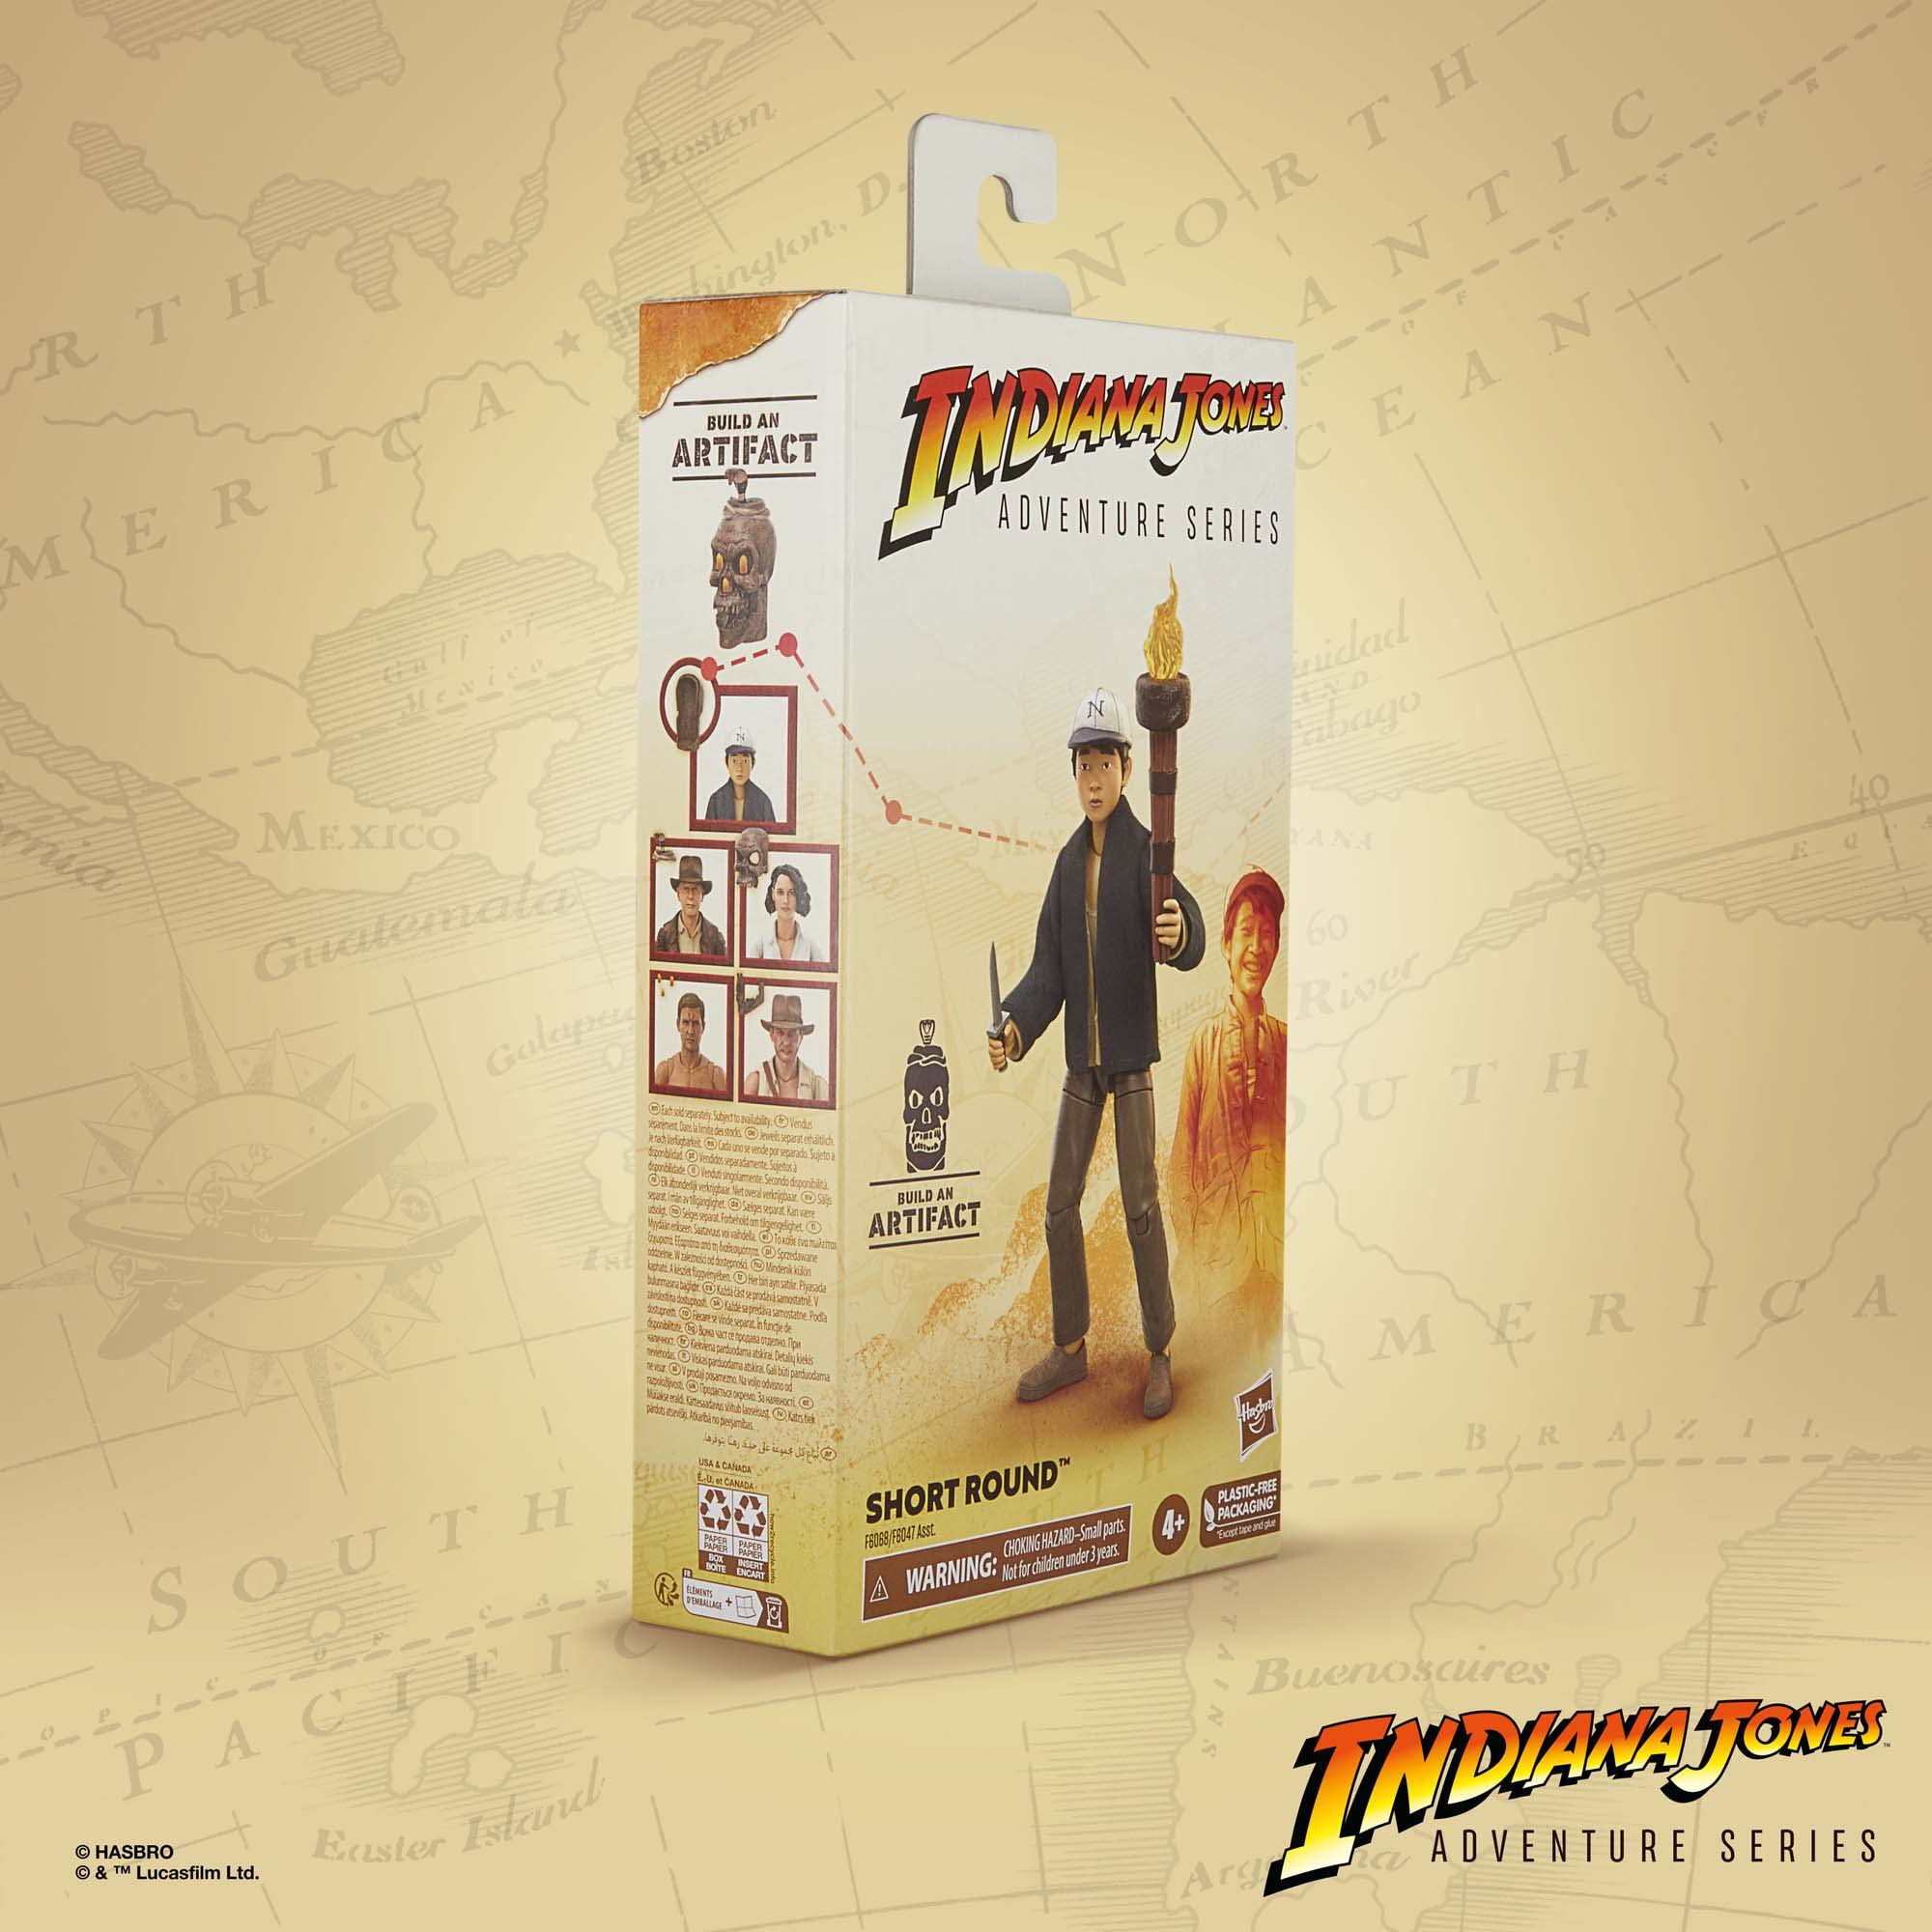 Indiana Jones and The Temple of Doom Adventure Series Short Round Toy, 6-inch, Action Figures, Toys for Kids Ages 4 and up